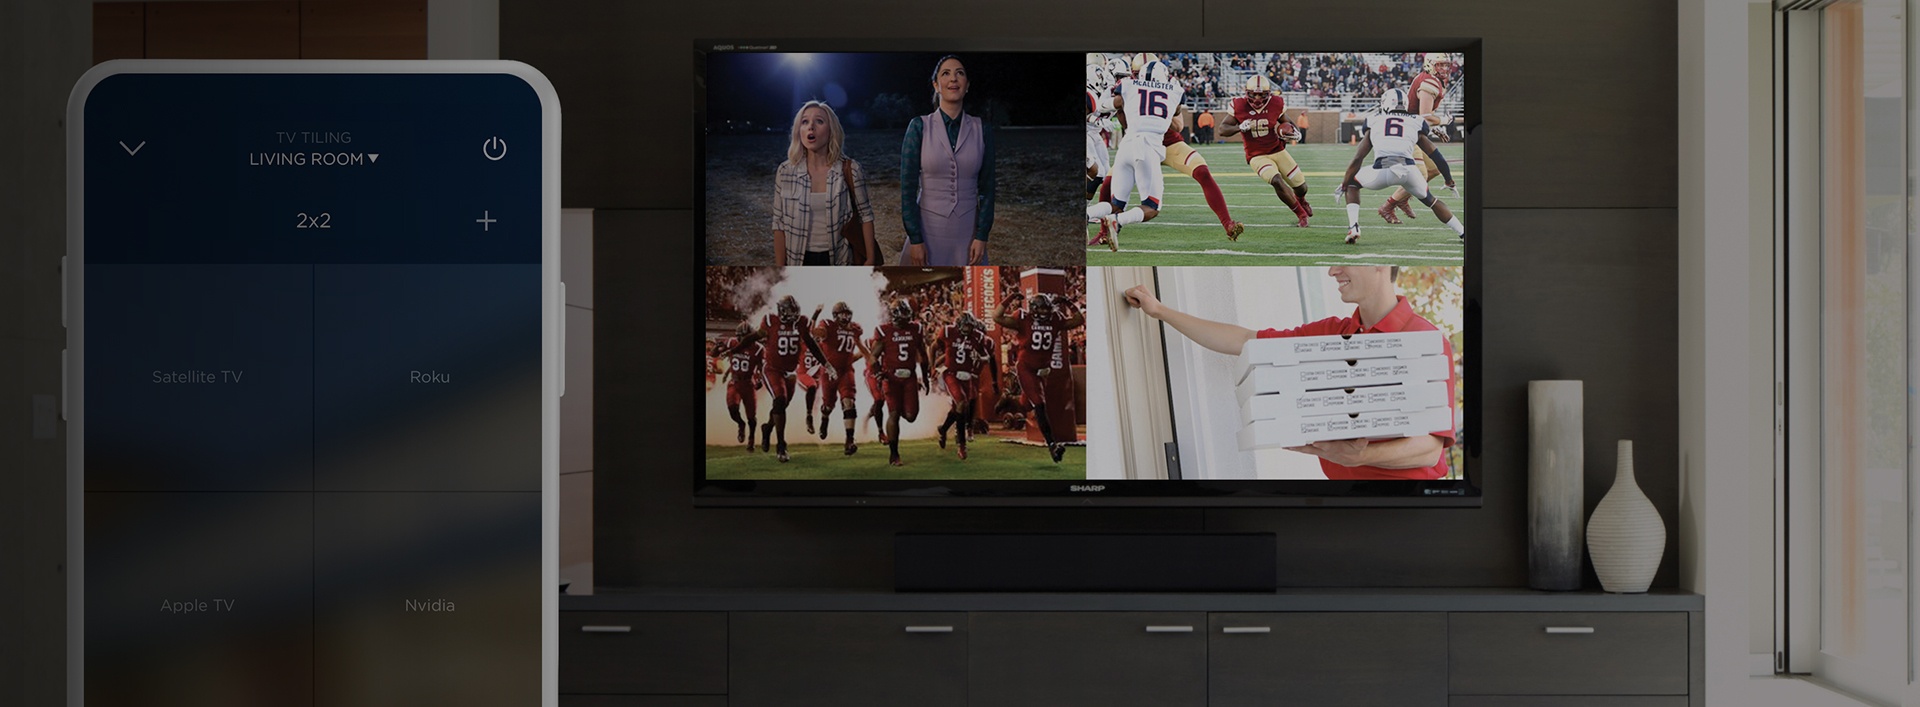 Contact AV Connect - Audio, Visual and Smart Home Installation Company in Austin, Texas